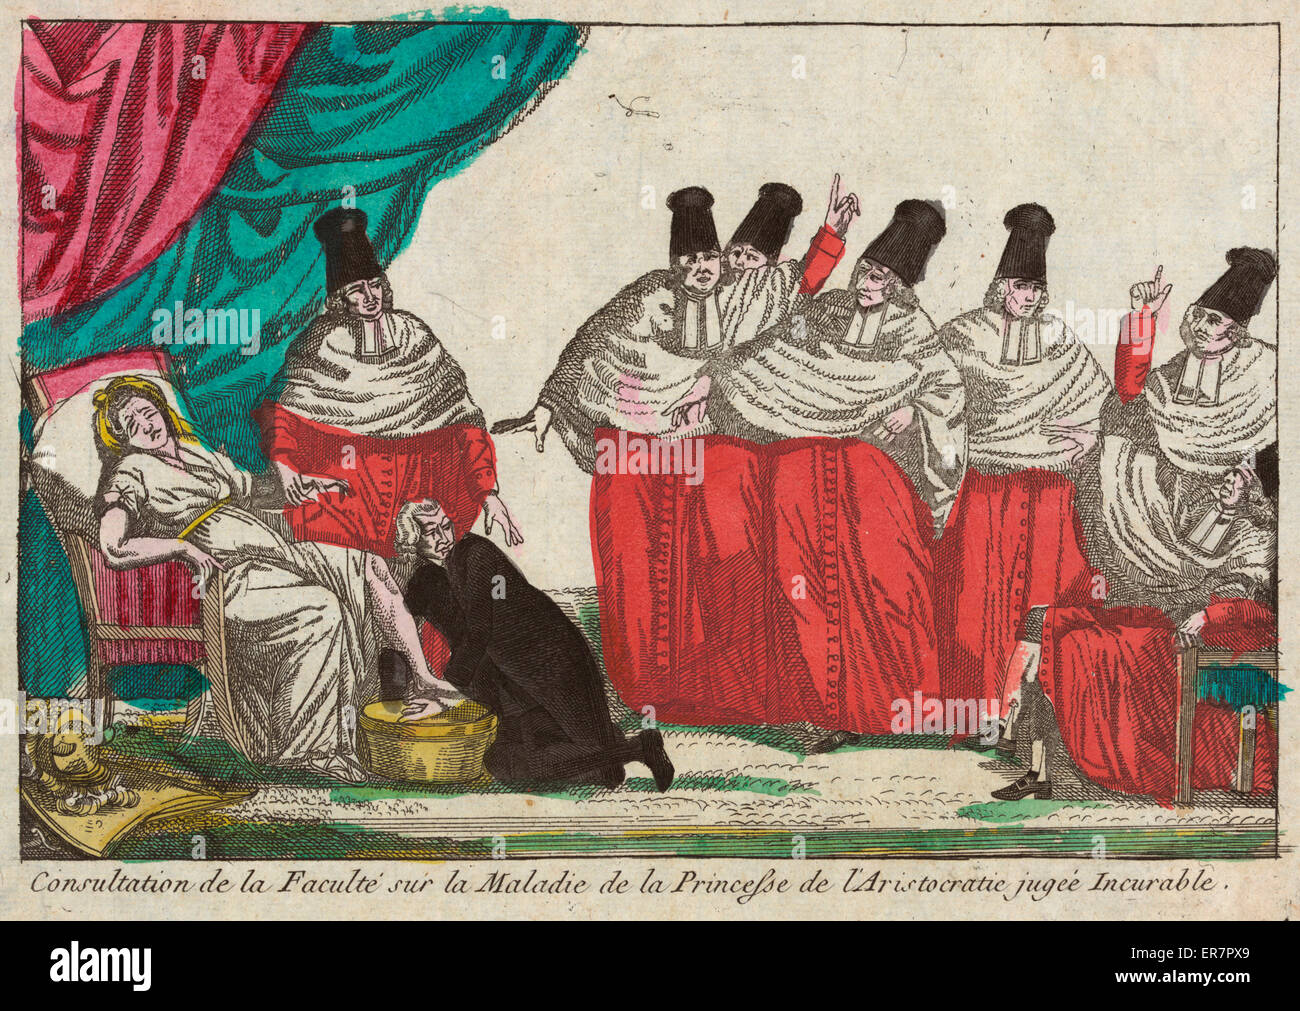 Consultation de la faculte sur la maladie de la princesse de l'aristocratie jugee incurable. Print shows a woman sitting in a chair, one physician checking her pulse while another bathes her left foot, six additional physicians gesture wildly, presuming h Stock Photo